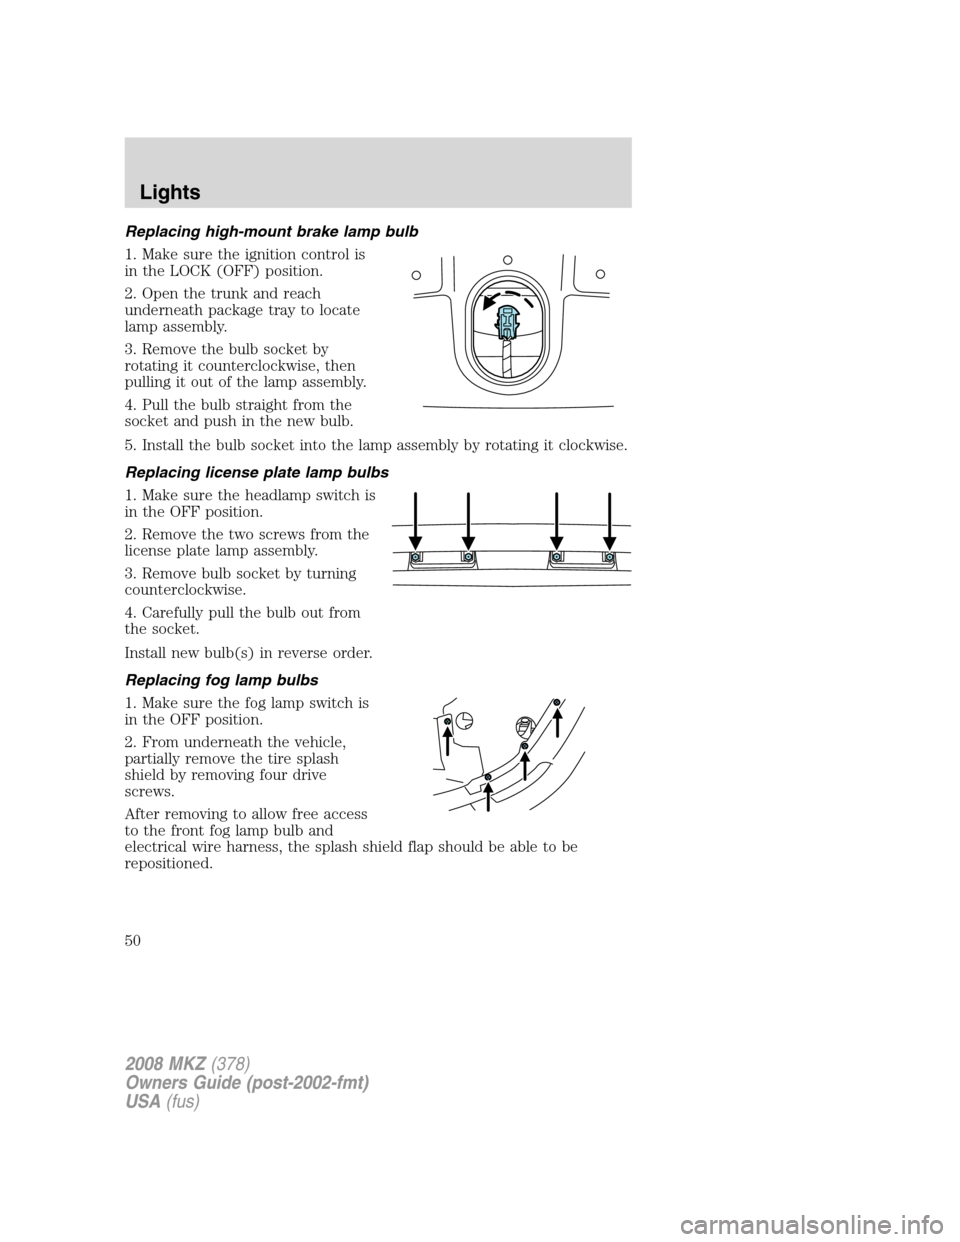 LINCOLN MKZ 2008 Service Manual Replacing high-mount brake lamp bulb
1. Make sure the ignition control is
in the LOCK (OFF) position.
2. Open the trunk and reach
underneath package tray to locate
lamp assembly.
3. Remove the bulb so